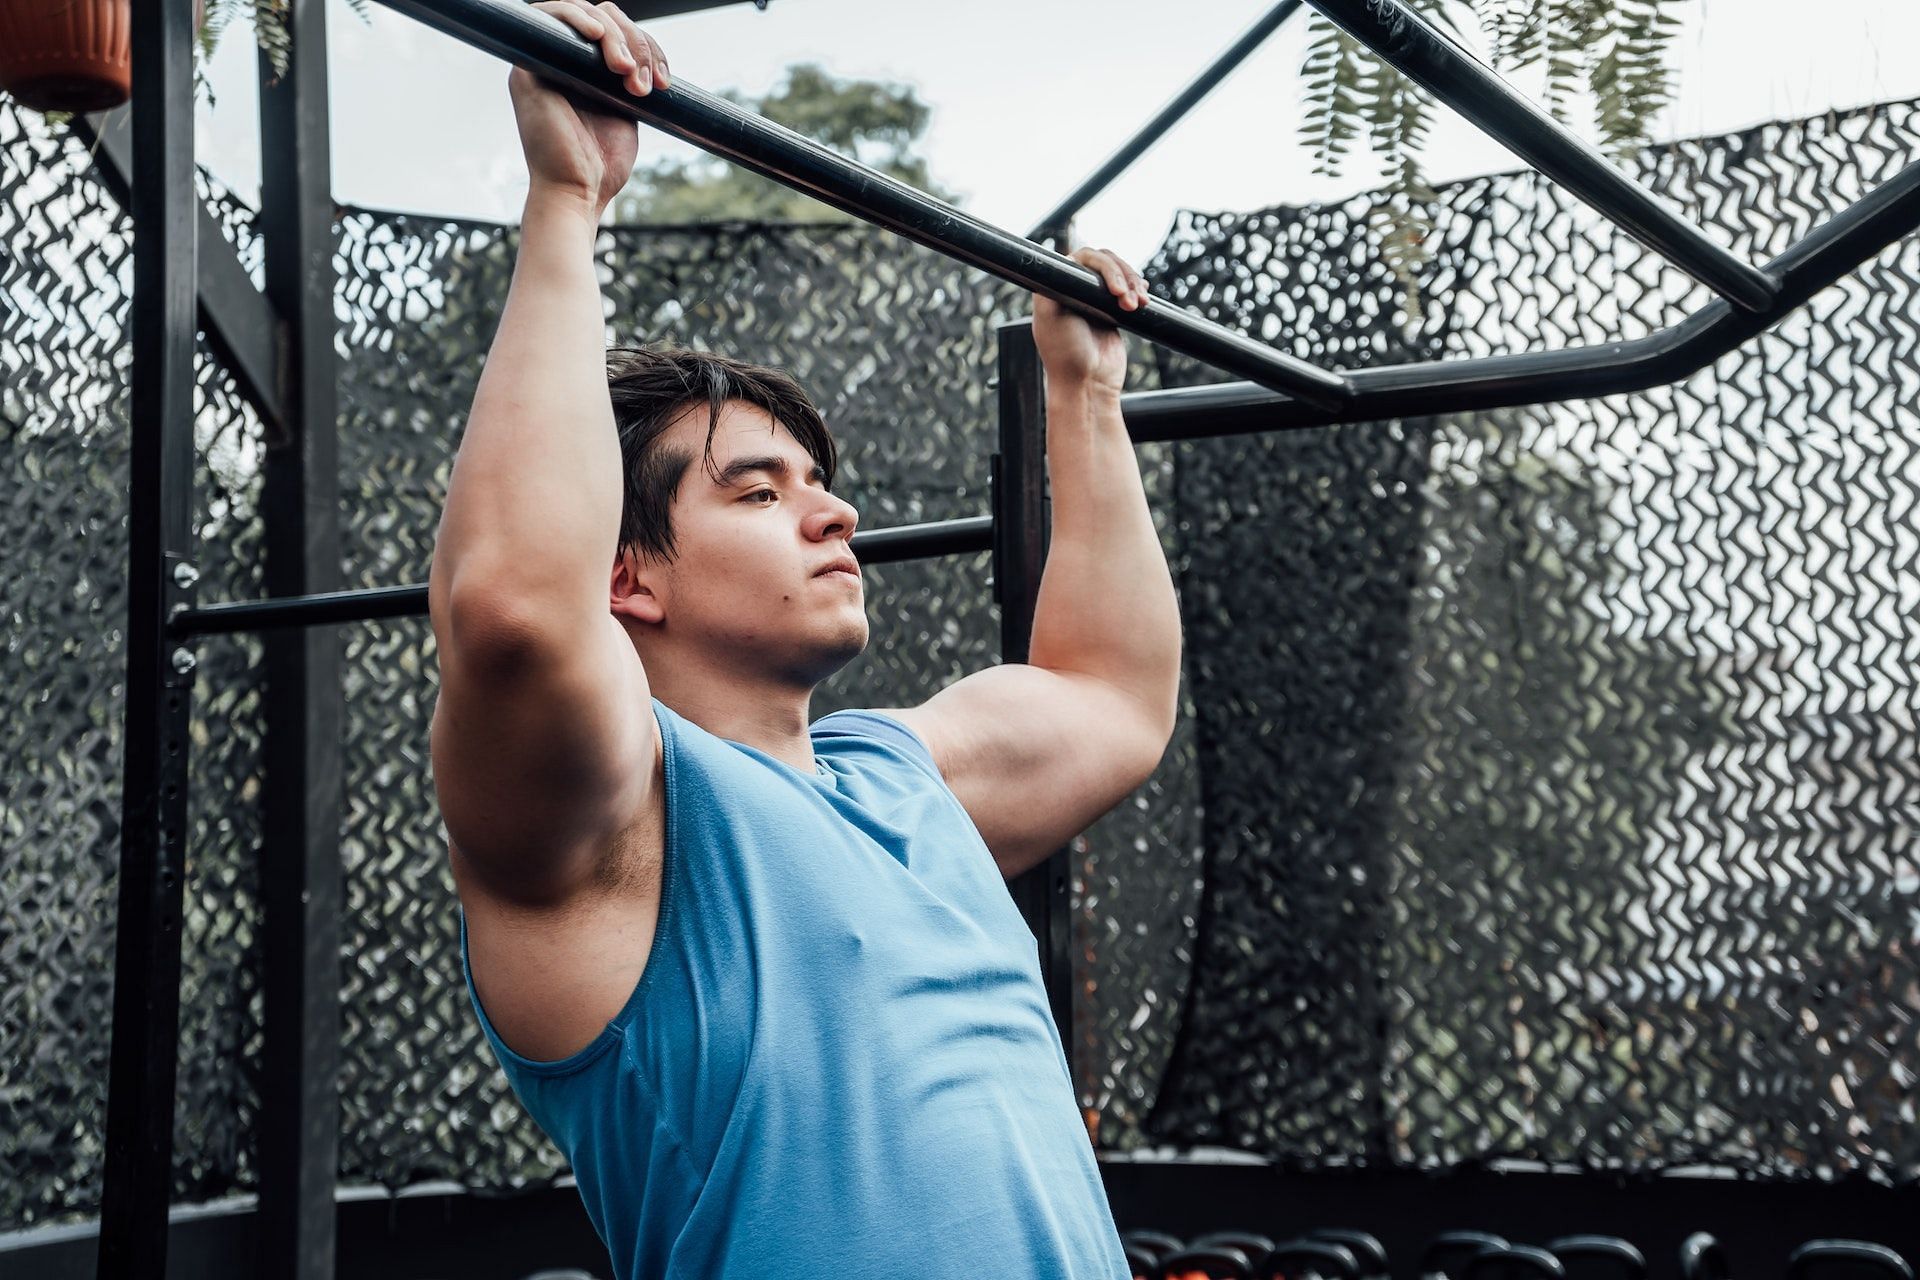 Pull-ups are a great muscle building exercise for women. (Photo via Pexels/Mike Gonz&aacute;lez)